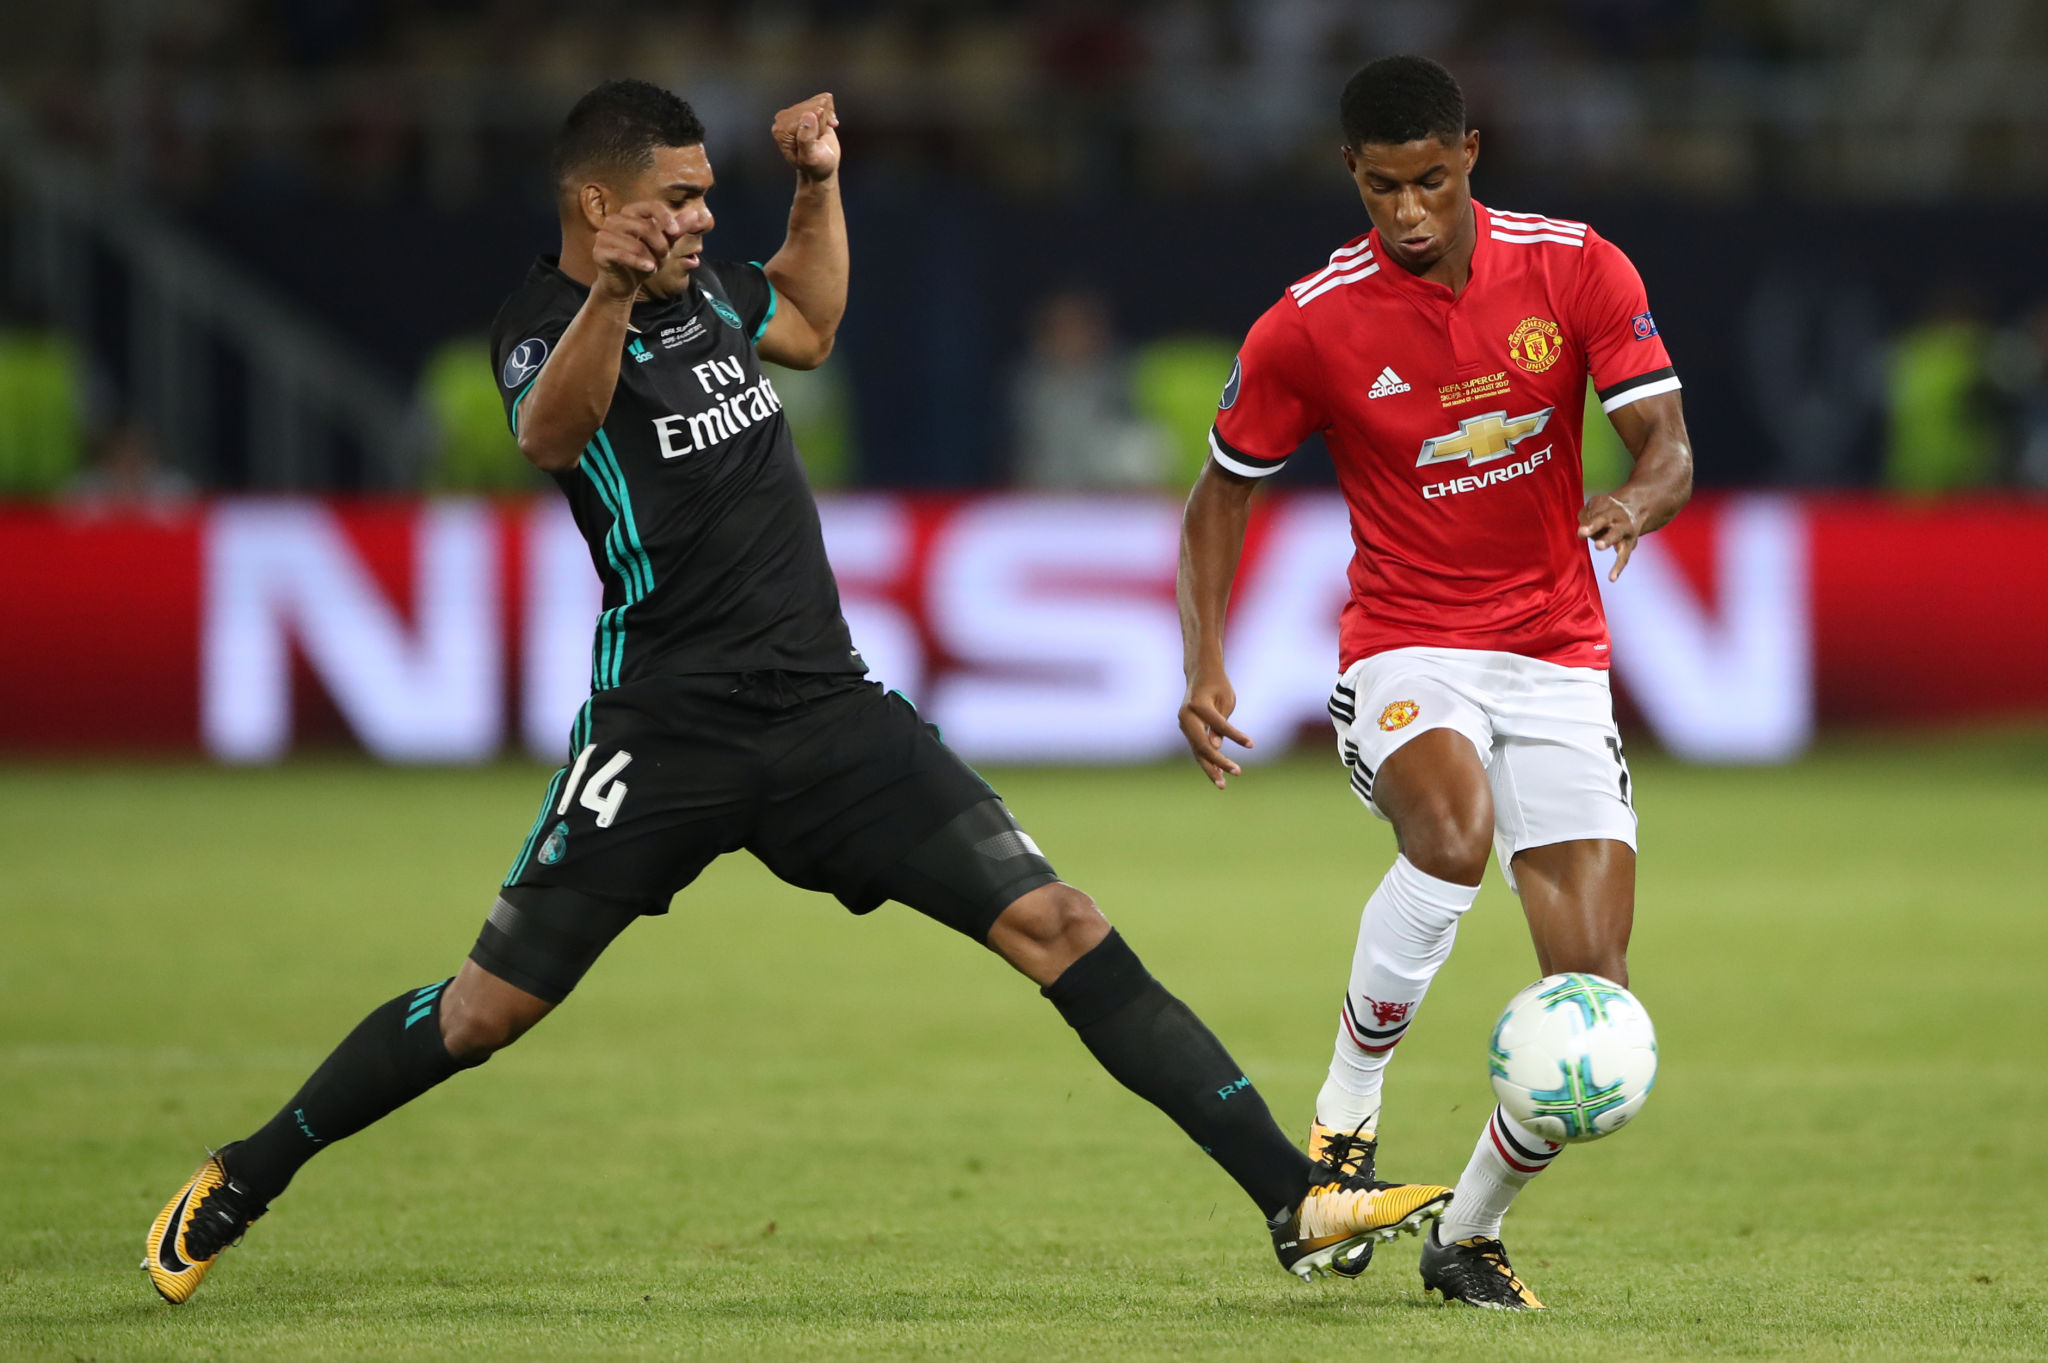 Manchester United Transfers: OFFICIAL! Red Devils SECURE services of Real Madrid midfielder Casemiro, Medicals to take place over Weekend - Check Out